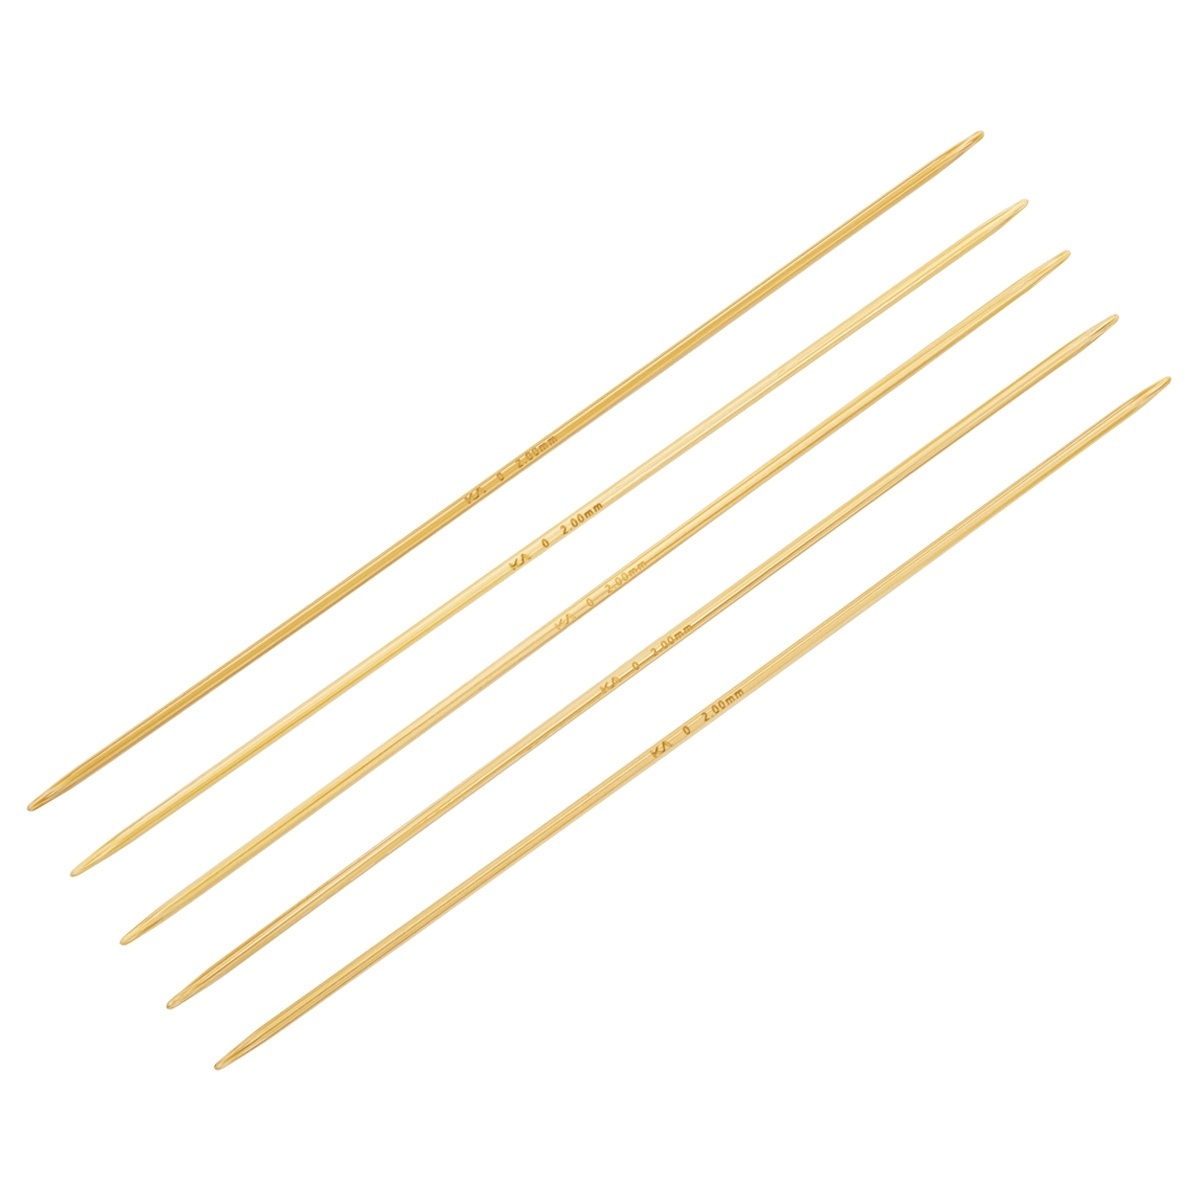 Double-pointed knitting needles, Seeknit, 2mm фото 2